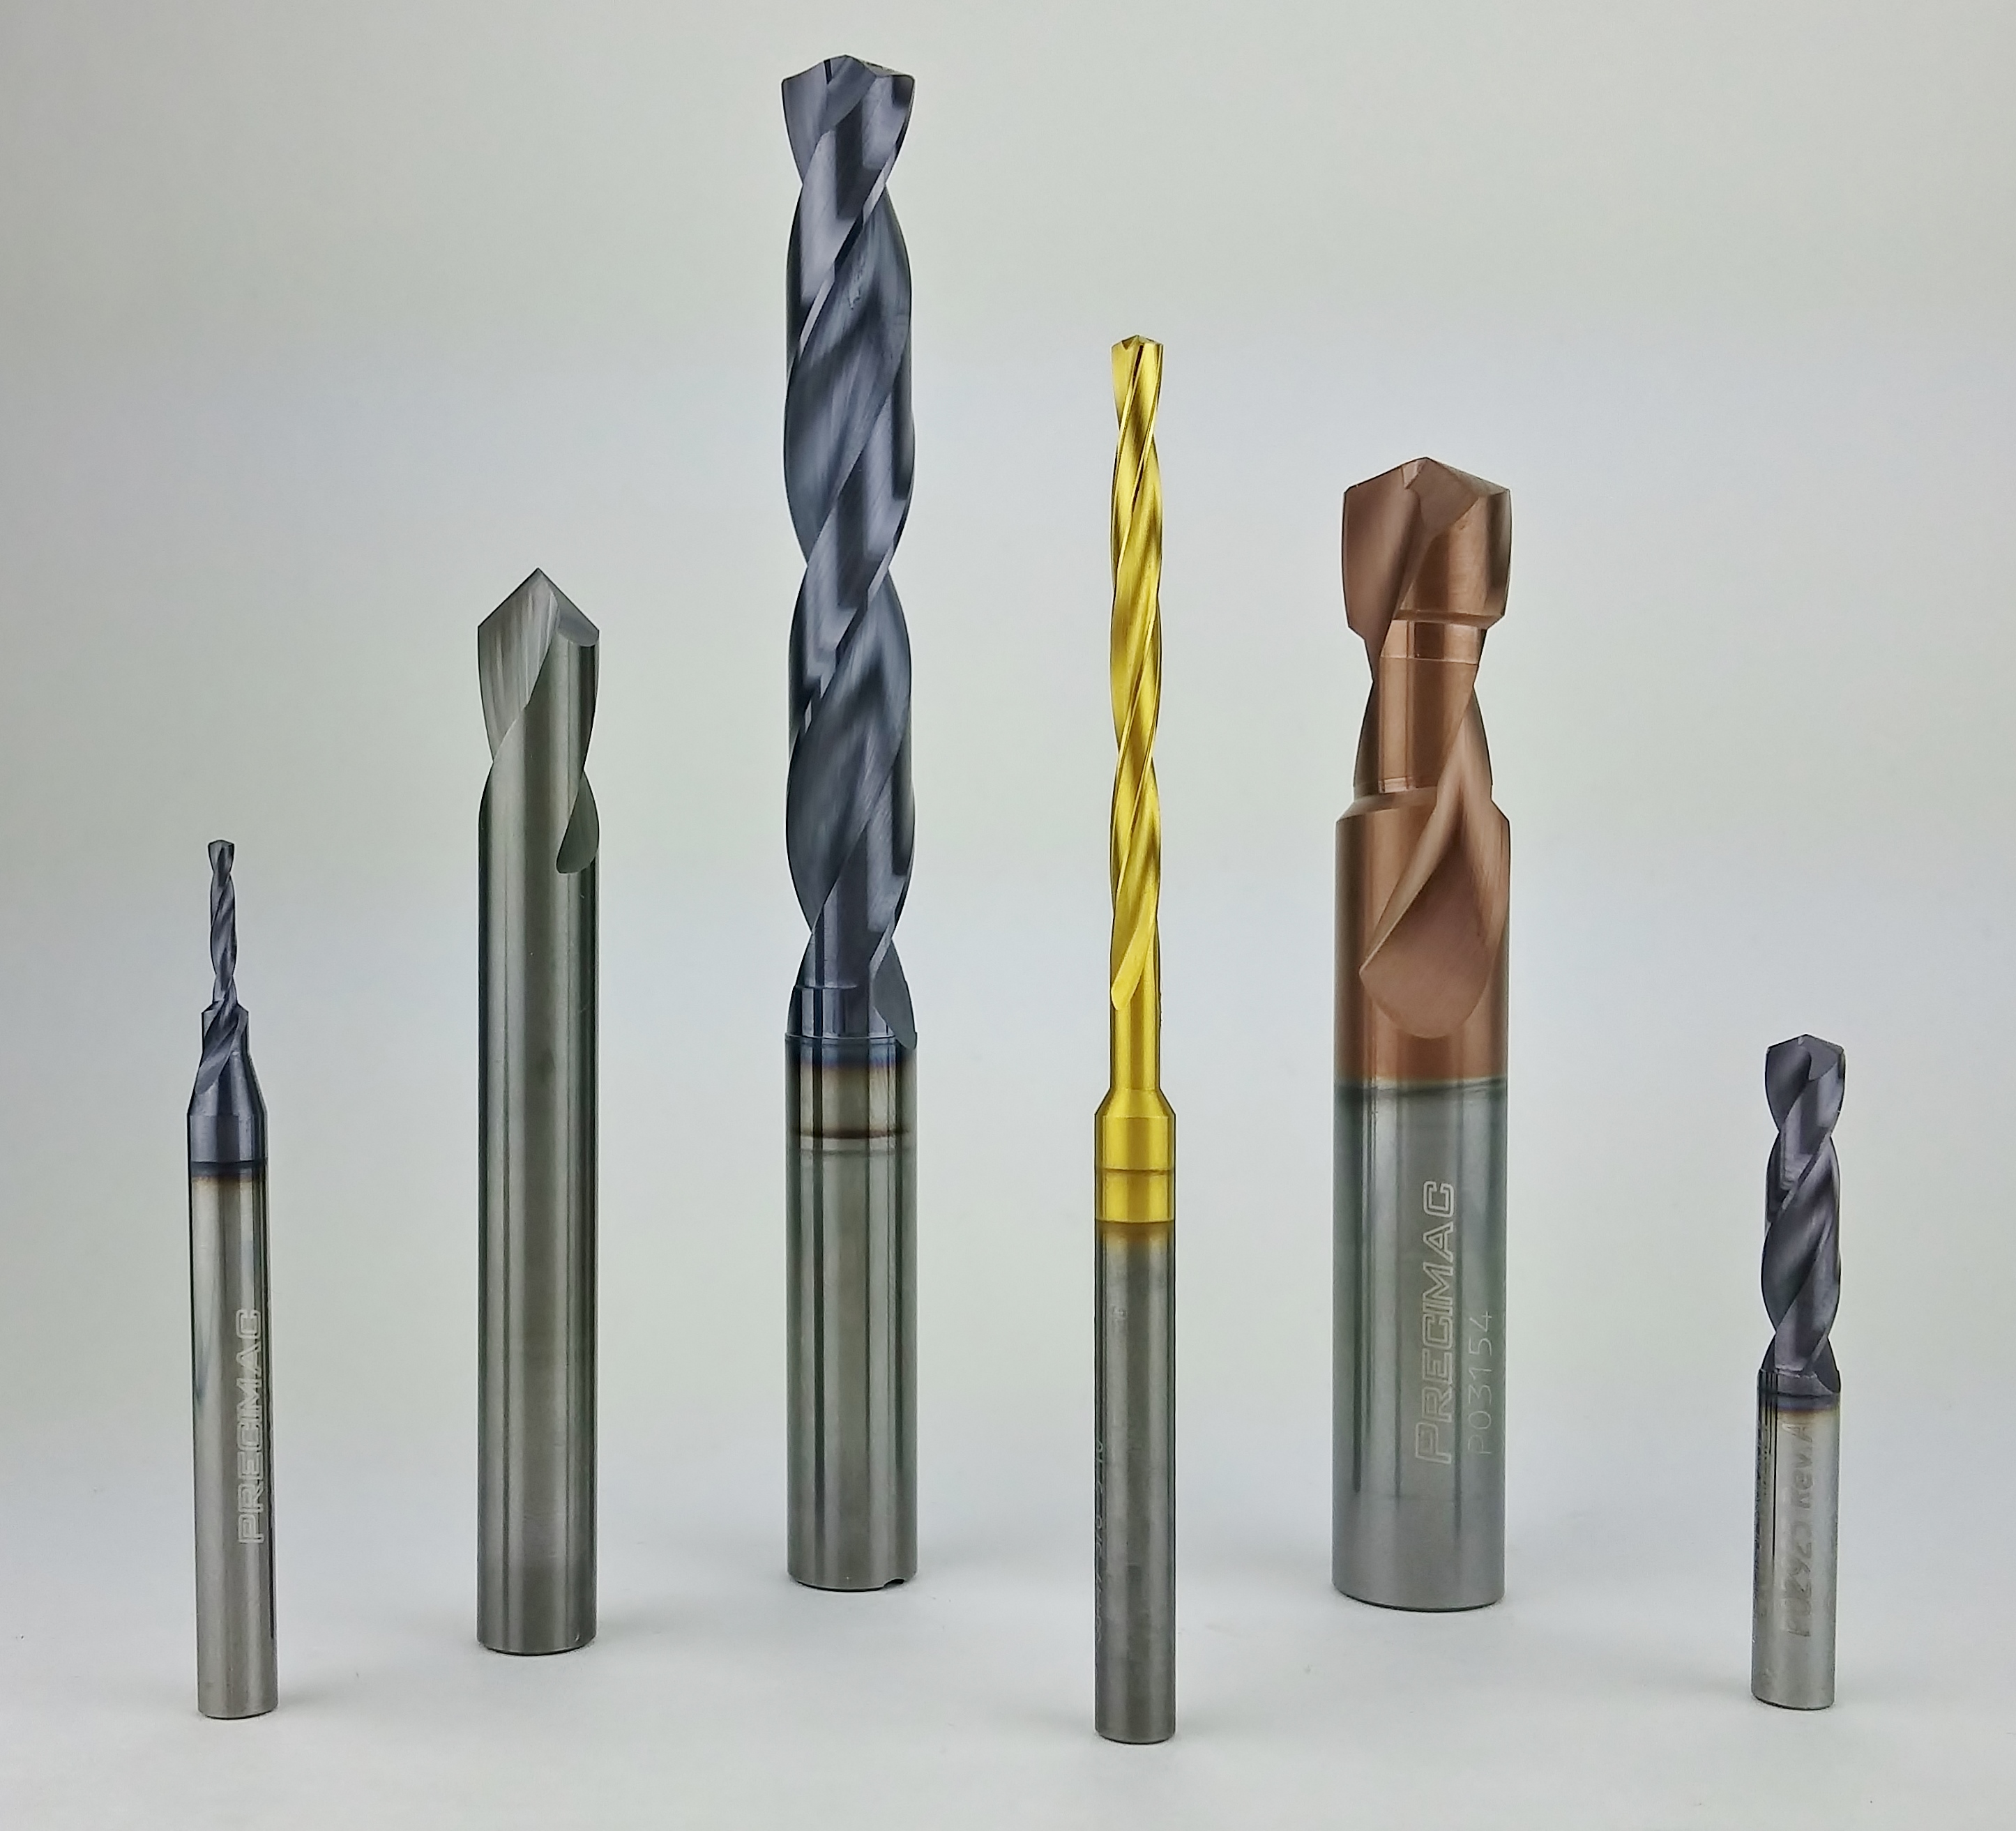 118 Degrees Tool Material Normal Point Size pack of 5 Screw Machine Length Overall Length Solid Carbide Drill Type 2 Point Sharpening Type # 40 TTC PRODUCTION Solid Carbide Screw Machine Length Twist Drills Drill Point Angle 